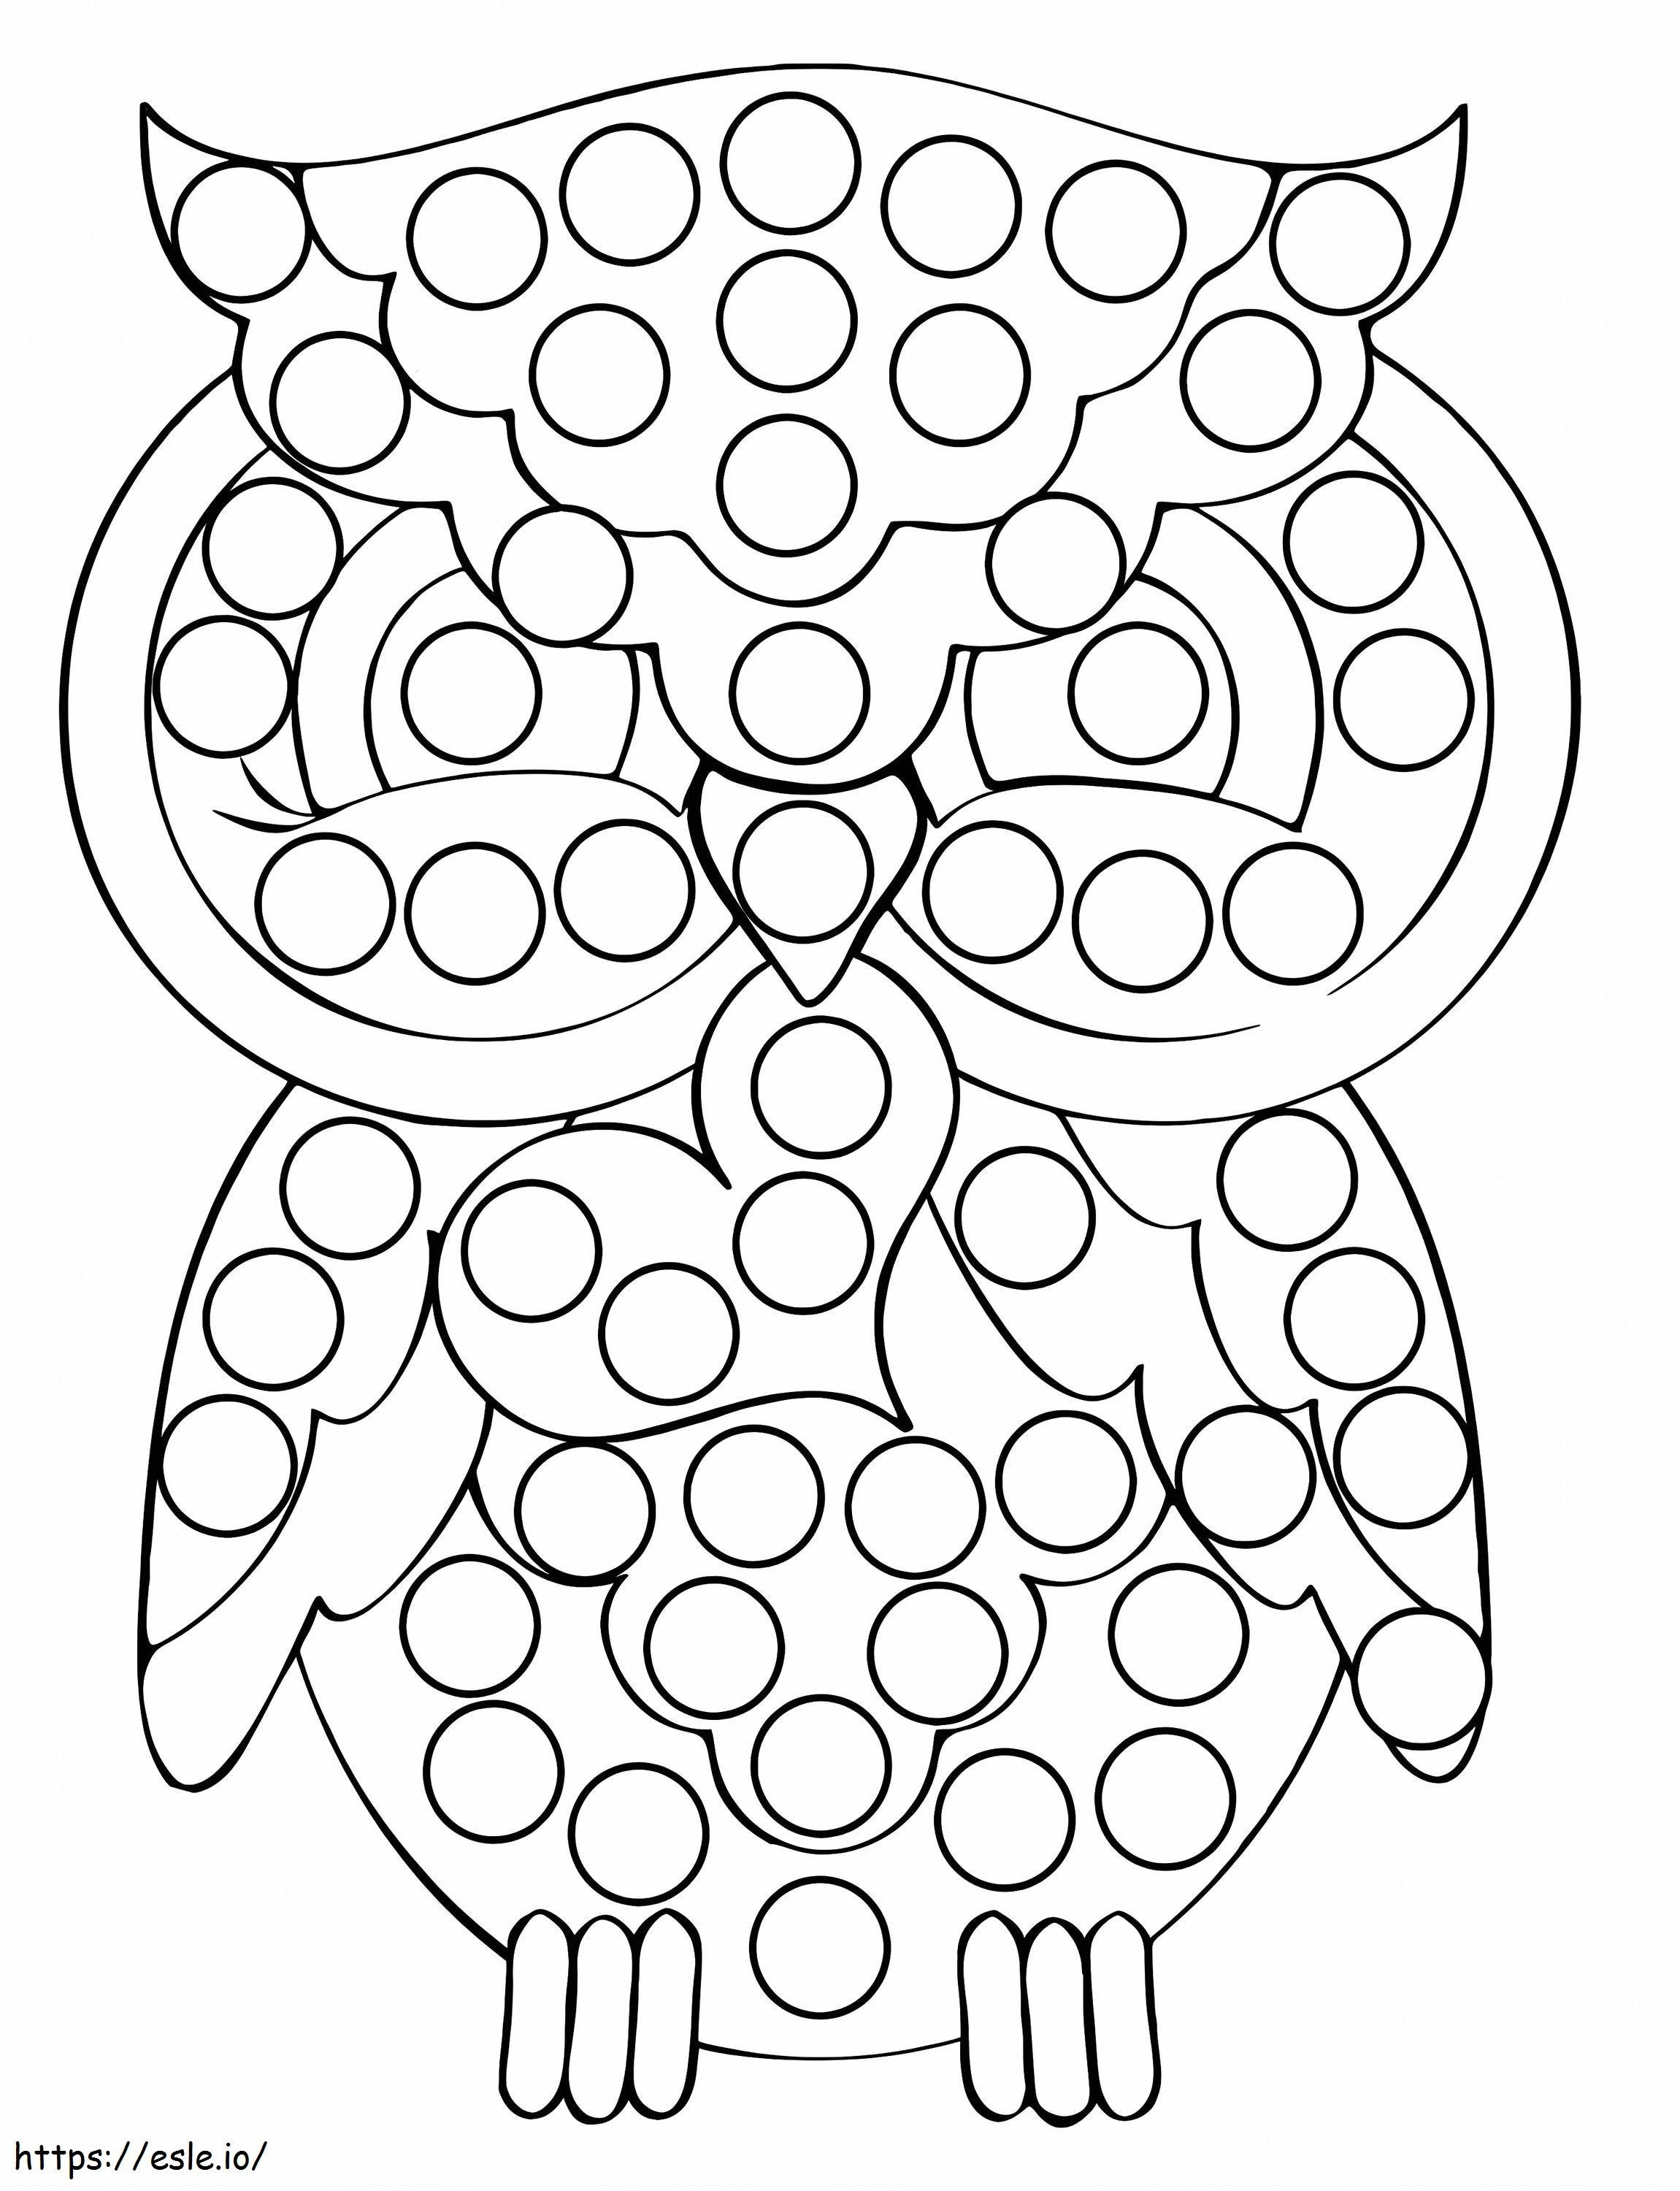 Owl Dot Marker coloring page